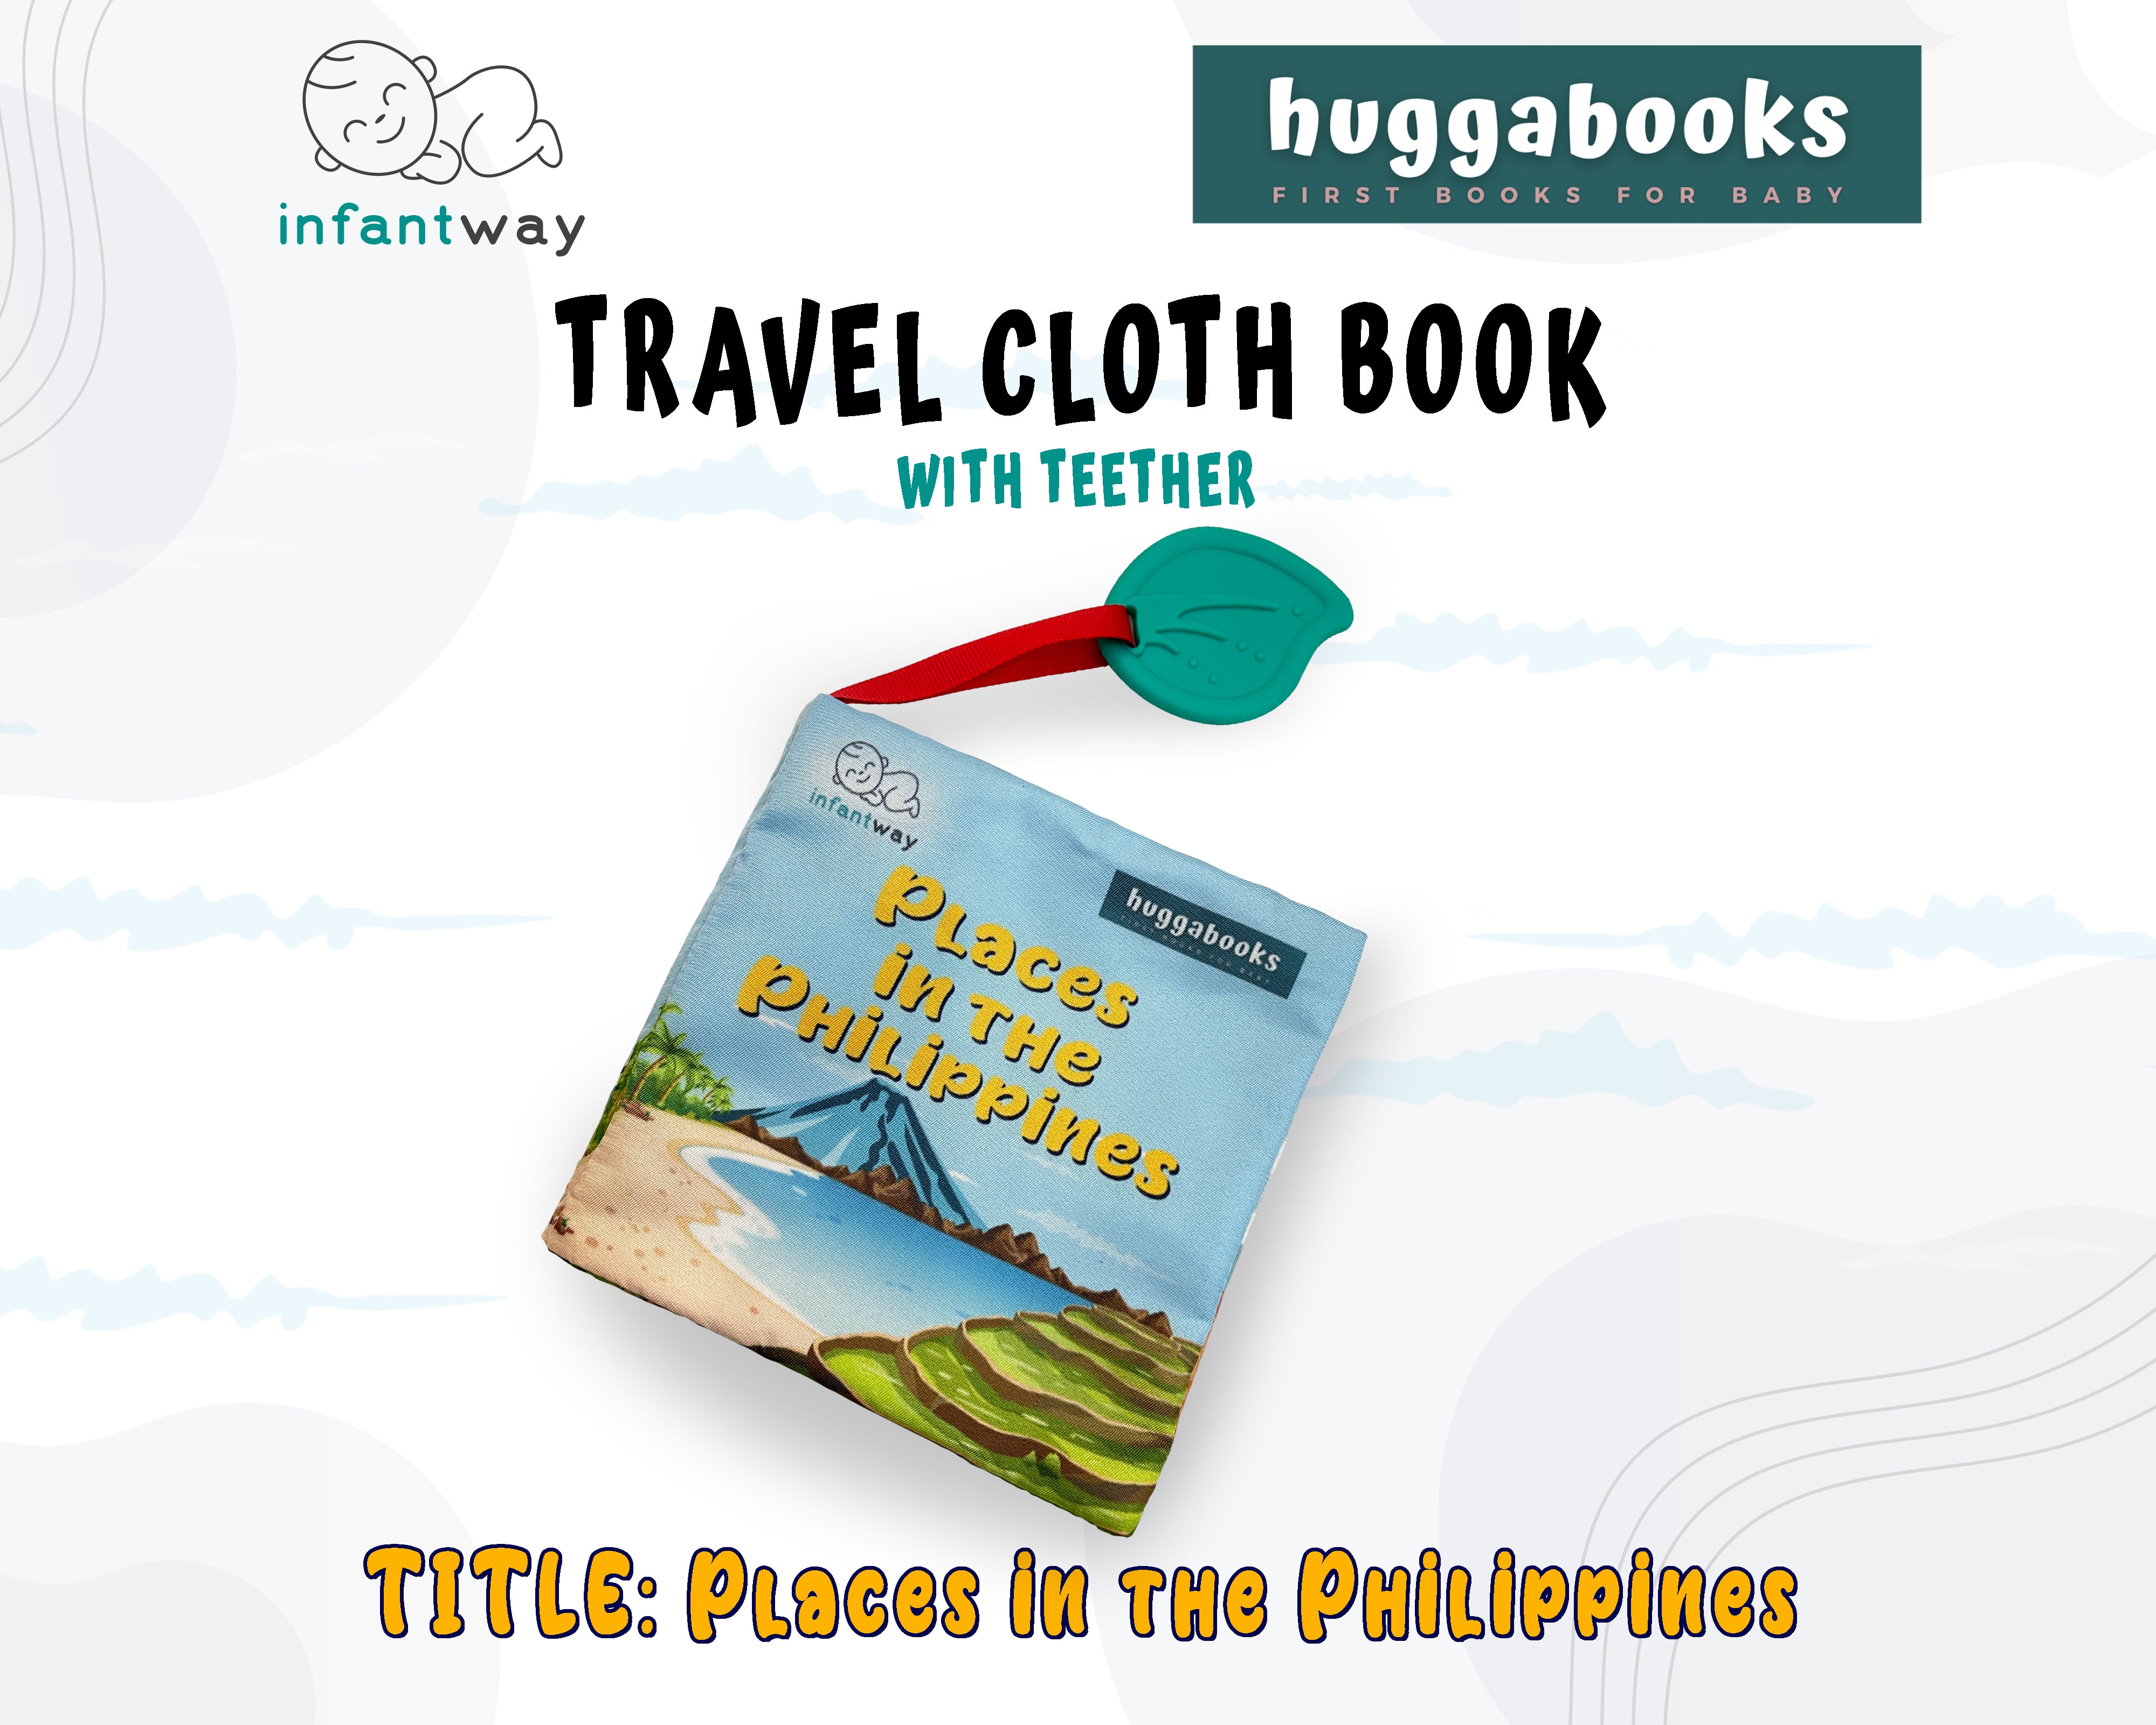 Infantway Huggabooks Travel Cloth Book with Teether